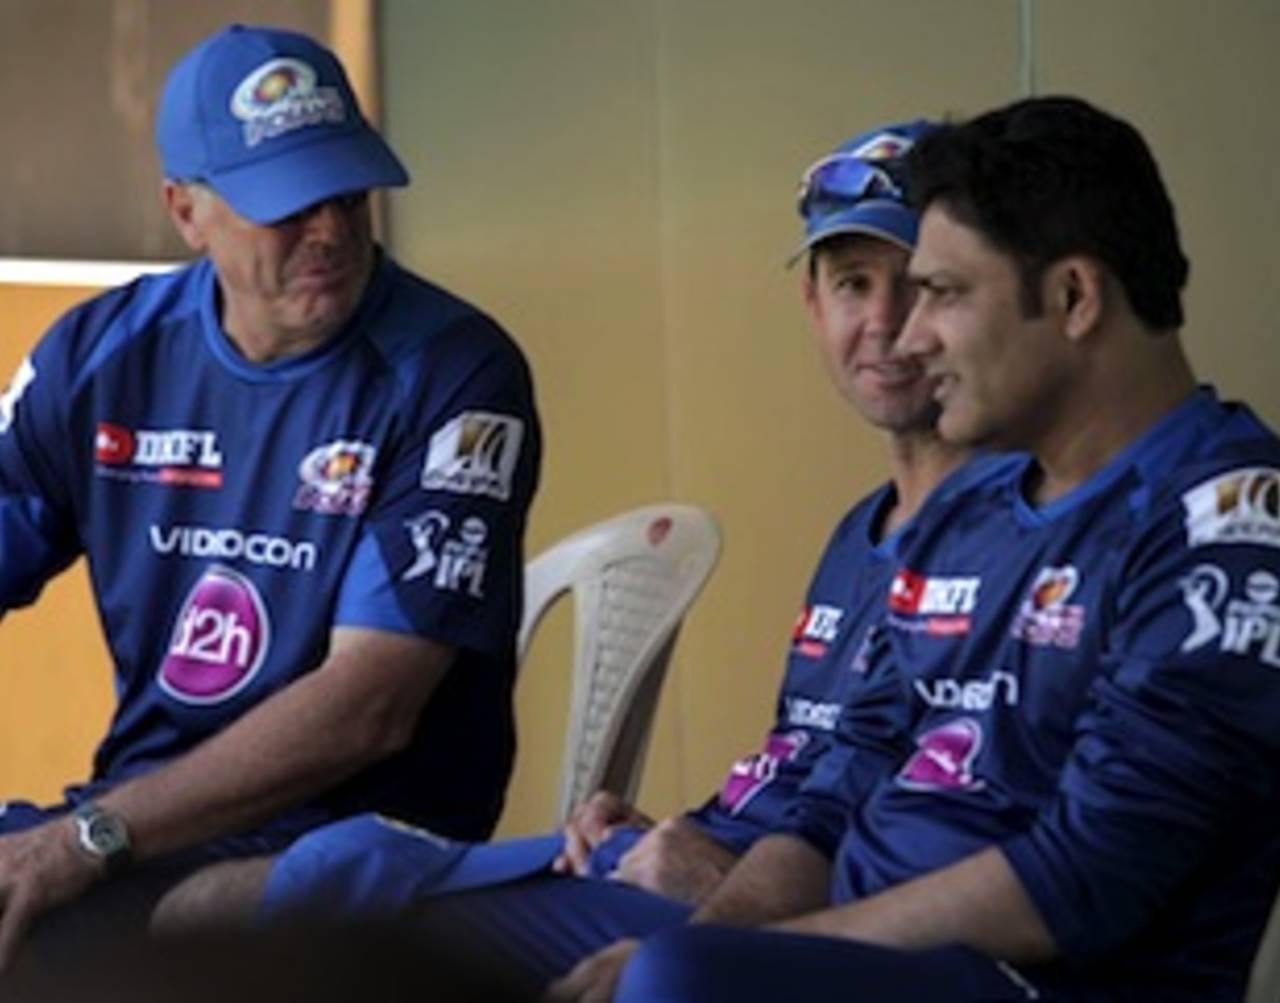 John Wright, Ricky Ponting and Anil Kumble have a chat, Mumbai, March 31, 2013